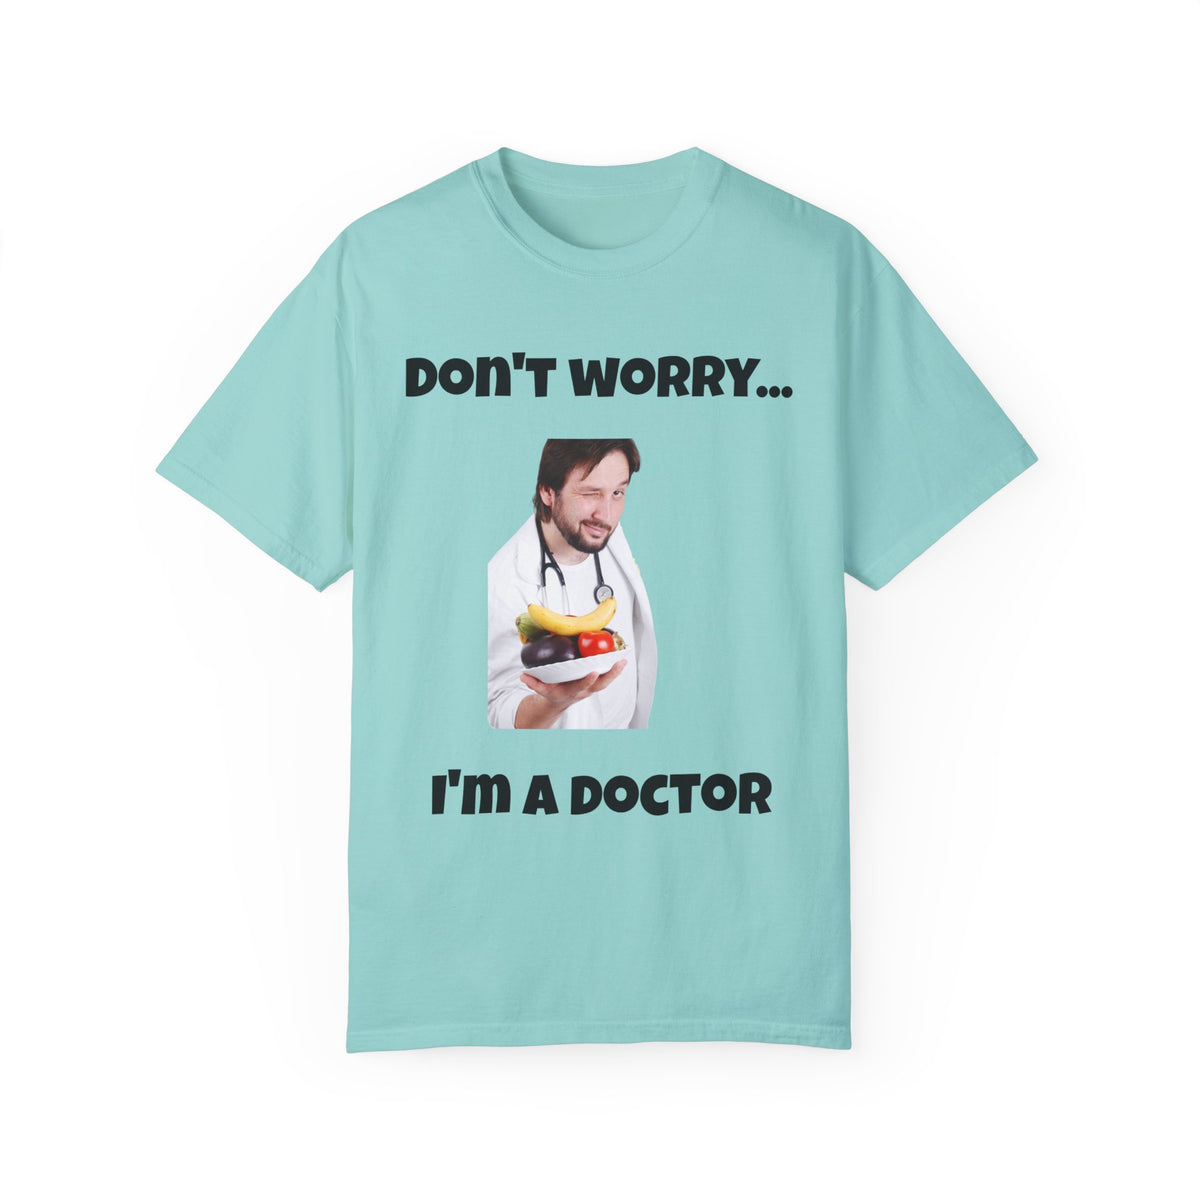 "Don't Worry...I'm a Doctor" Jest In Bad Taste original (Unisex Tee)